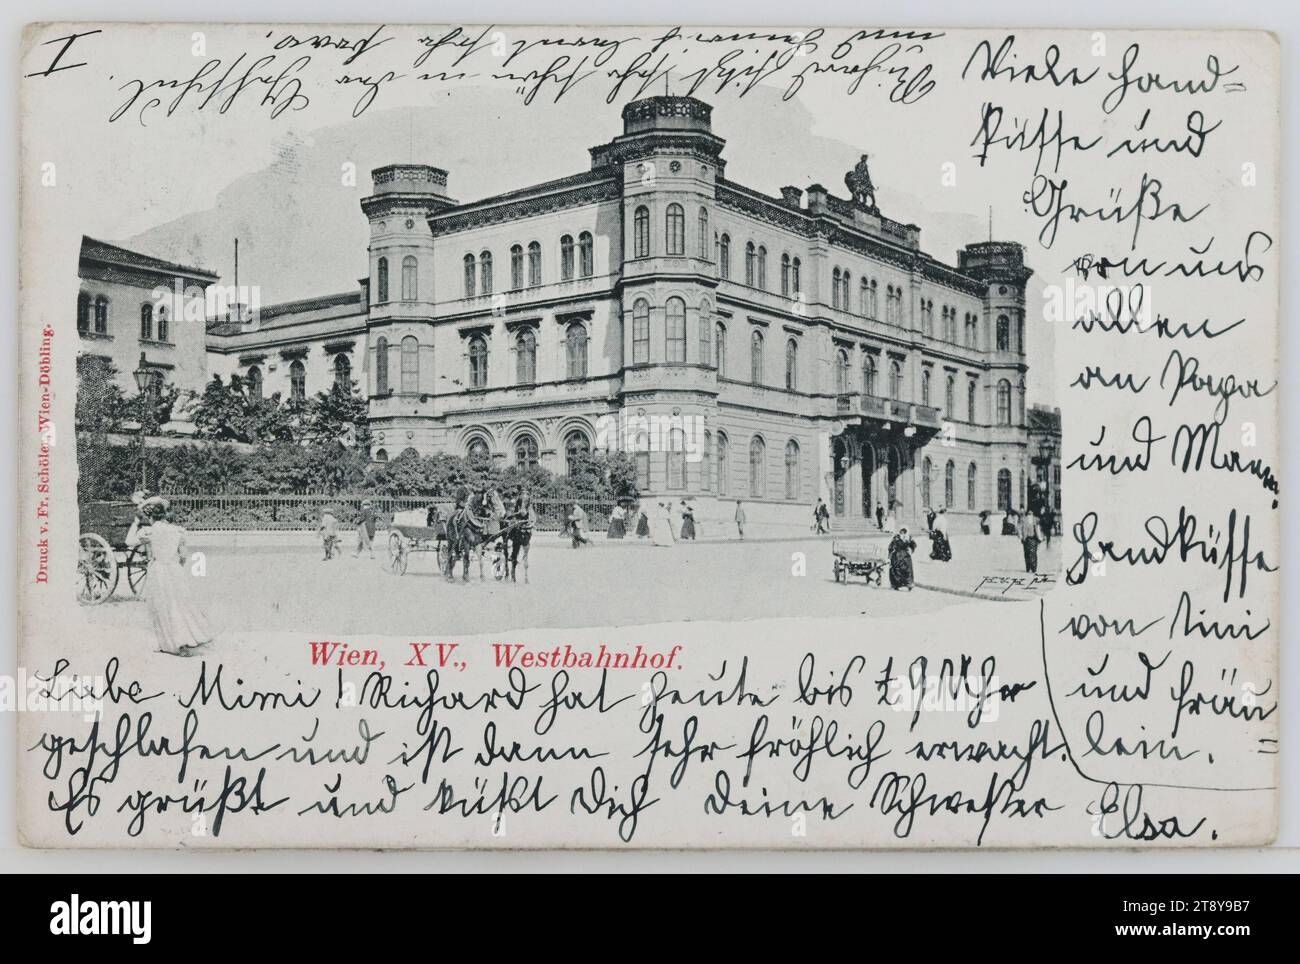 15th, Europaplatz 1 - Westbahnhof, picture postcard, Franz Schöler († 1911), producer, 1899, coated cardboard, halftone printing, lettering, FROM, Vienna, TO, Mattsee bei Seekirchen, ADDRESS, Wolgeboren Fräulein, Mattsee bei Seekirchen, Gasthof Steiner, MESSAGE, Dear Mimi! Richard slept until 1, 2 9 o'clock today and then awoke very cheerfully. Greetings and kisses from your sister, Many hand kisses and greetings from all of us to Papa and Mama, Hand kisses from Tini and Fräulein Elsa, Richard is sitting very nicely in the walking school and Heinrich is learning very well Stock Photo